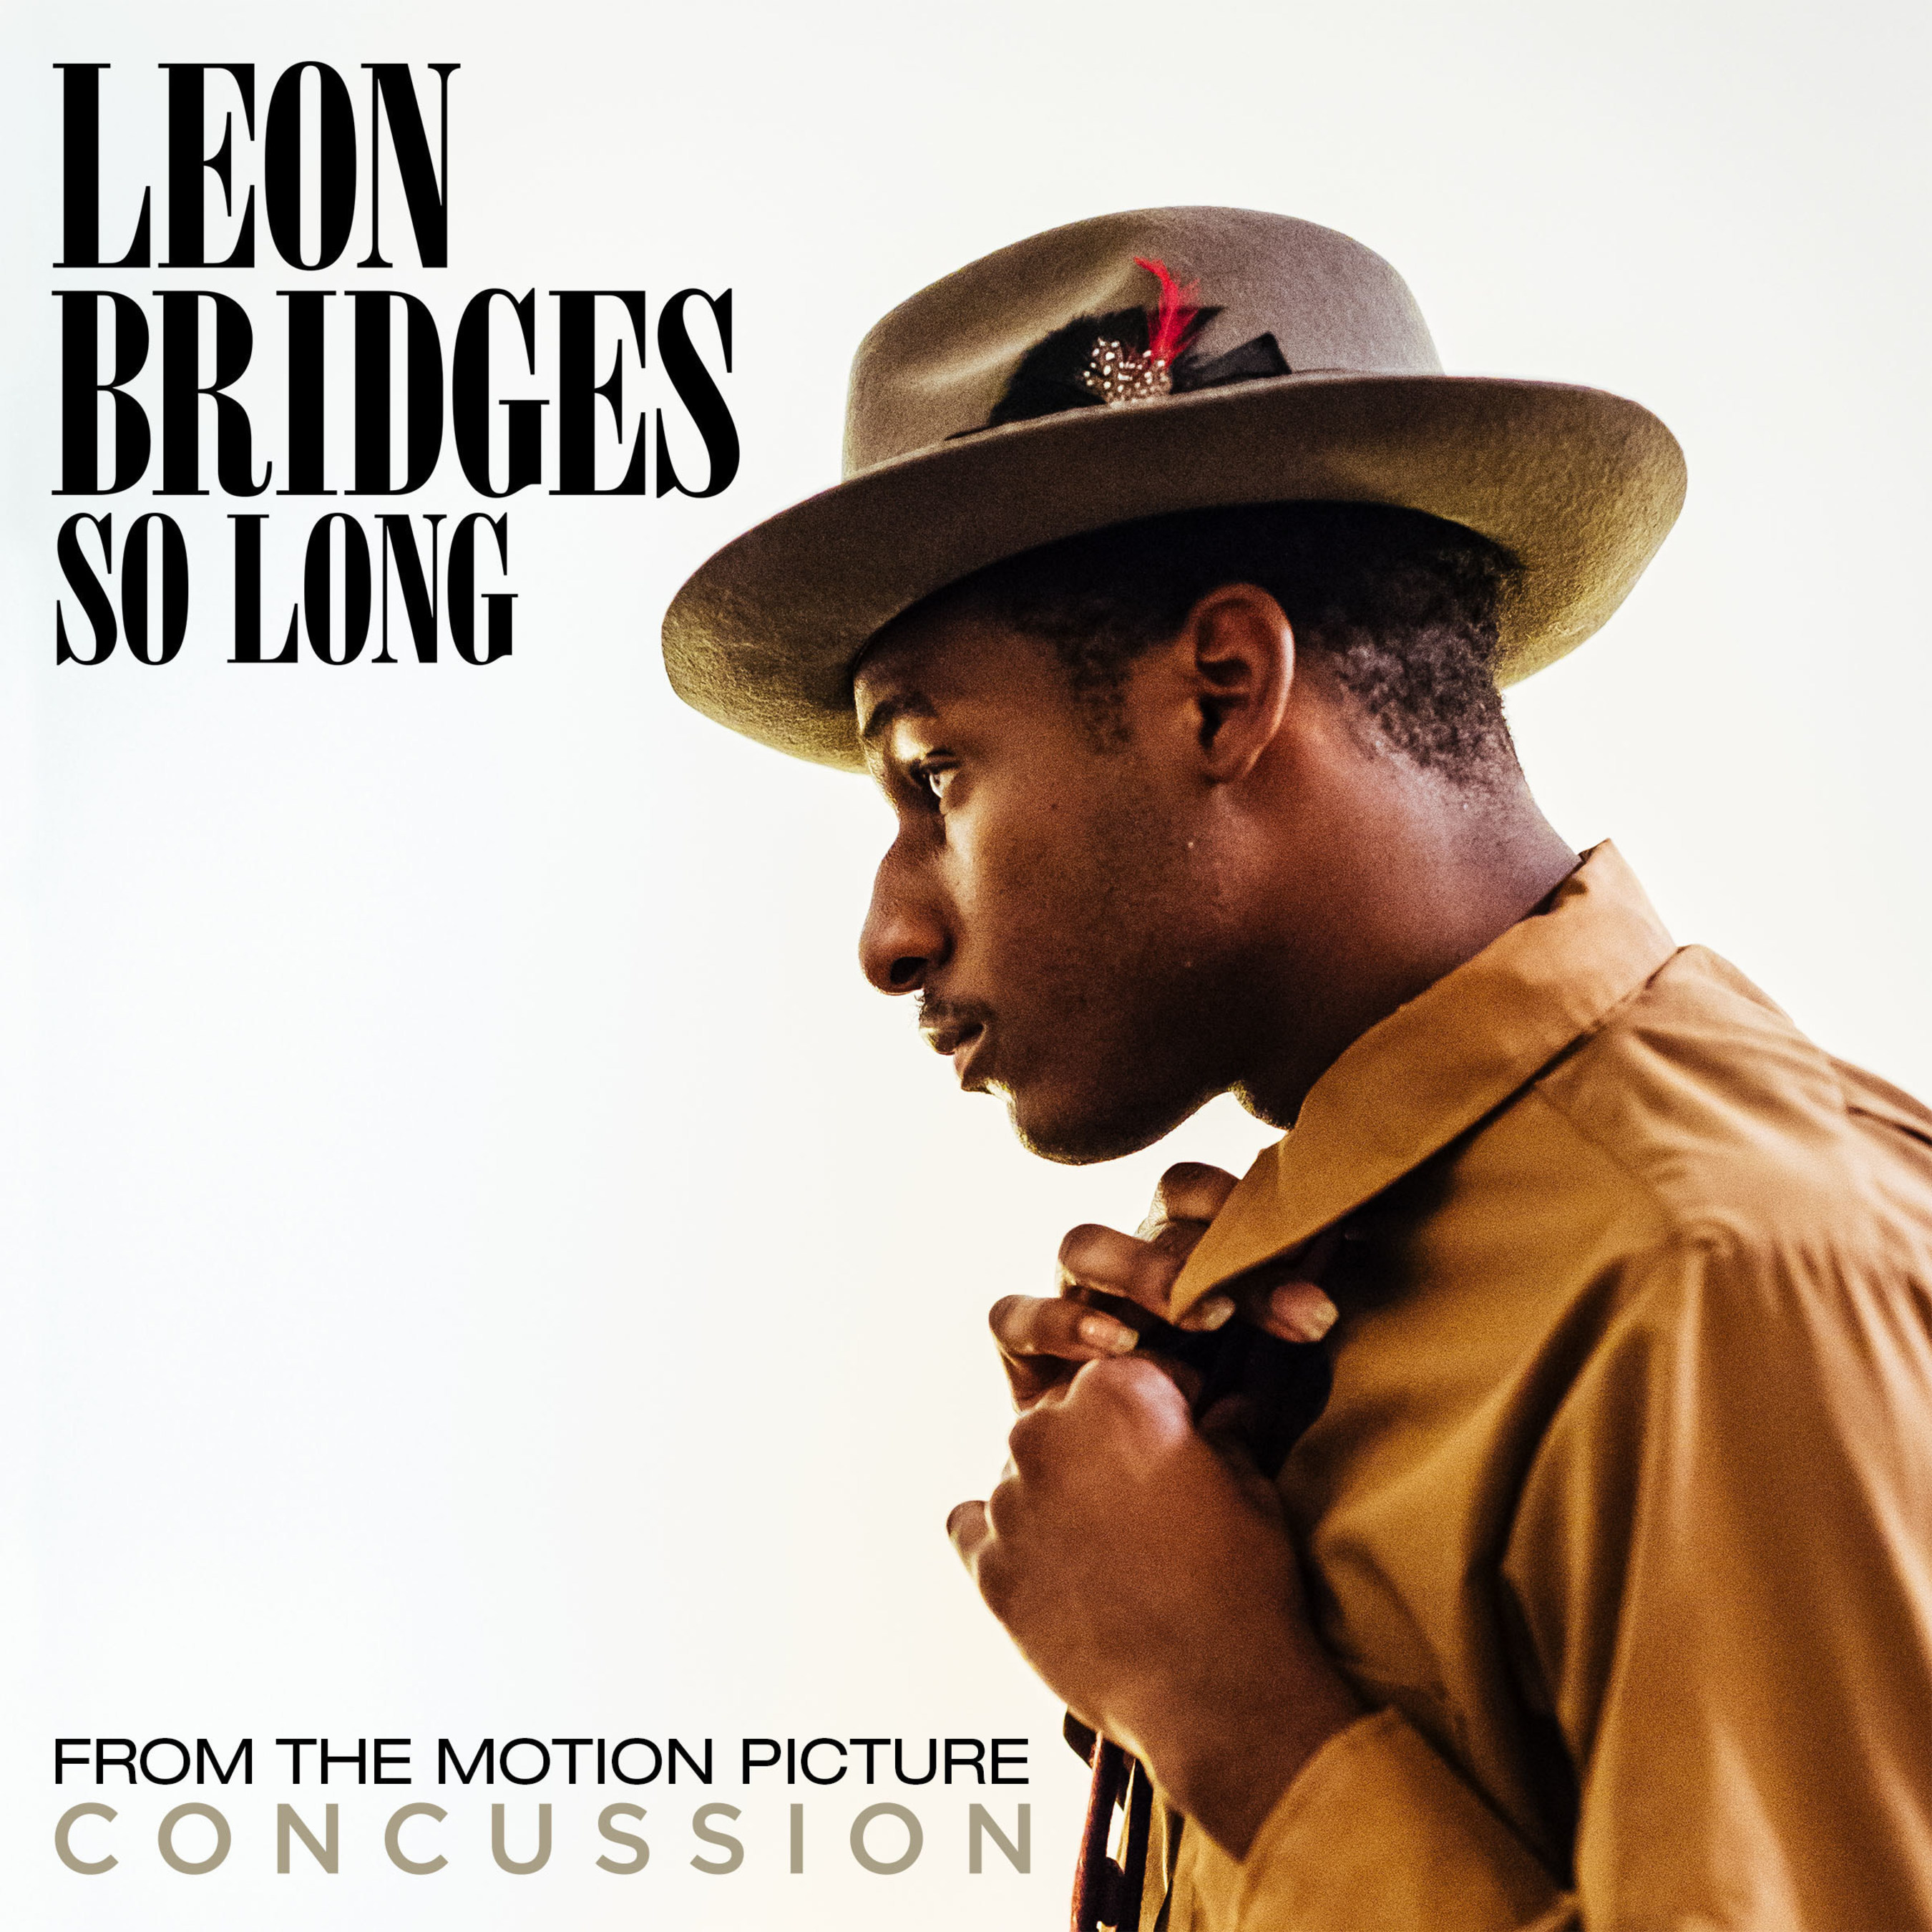 Critically Acclaimed R&B Artist Leon Bridges To Provide New Song "So Long" For The Highly Anticipated Motion Picture "Concussion" Starring Will Smith